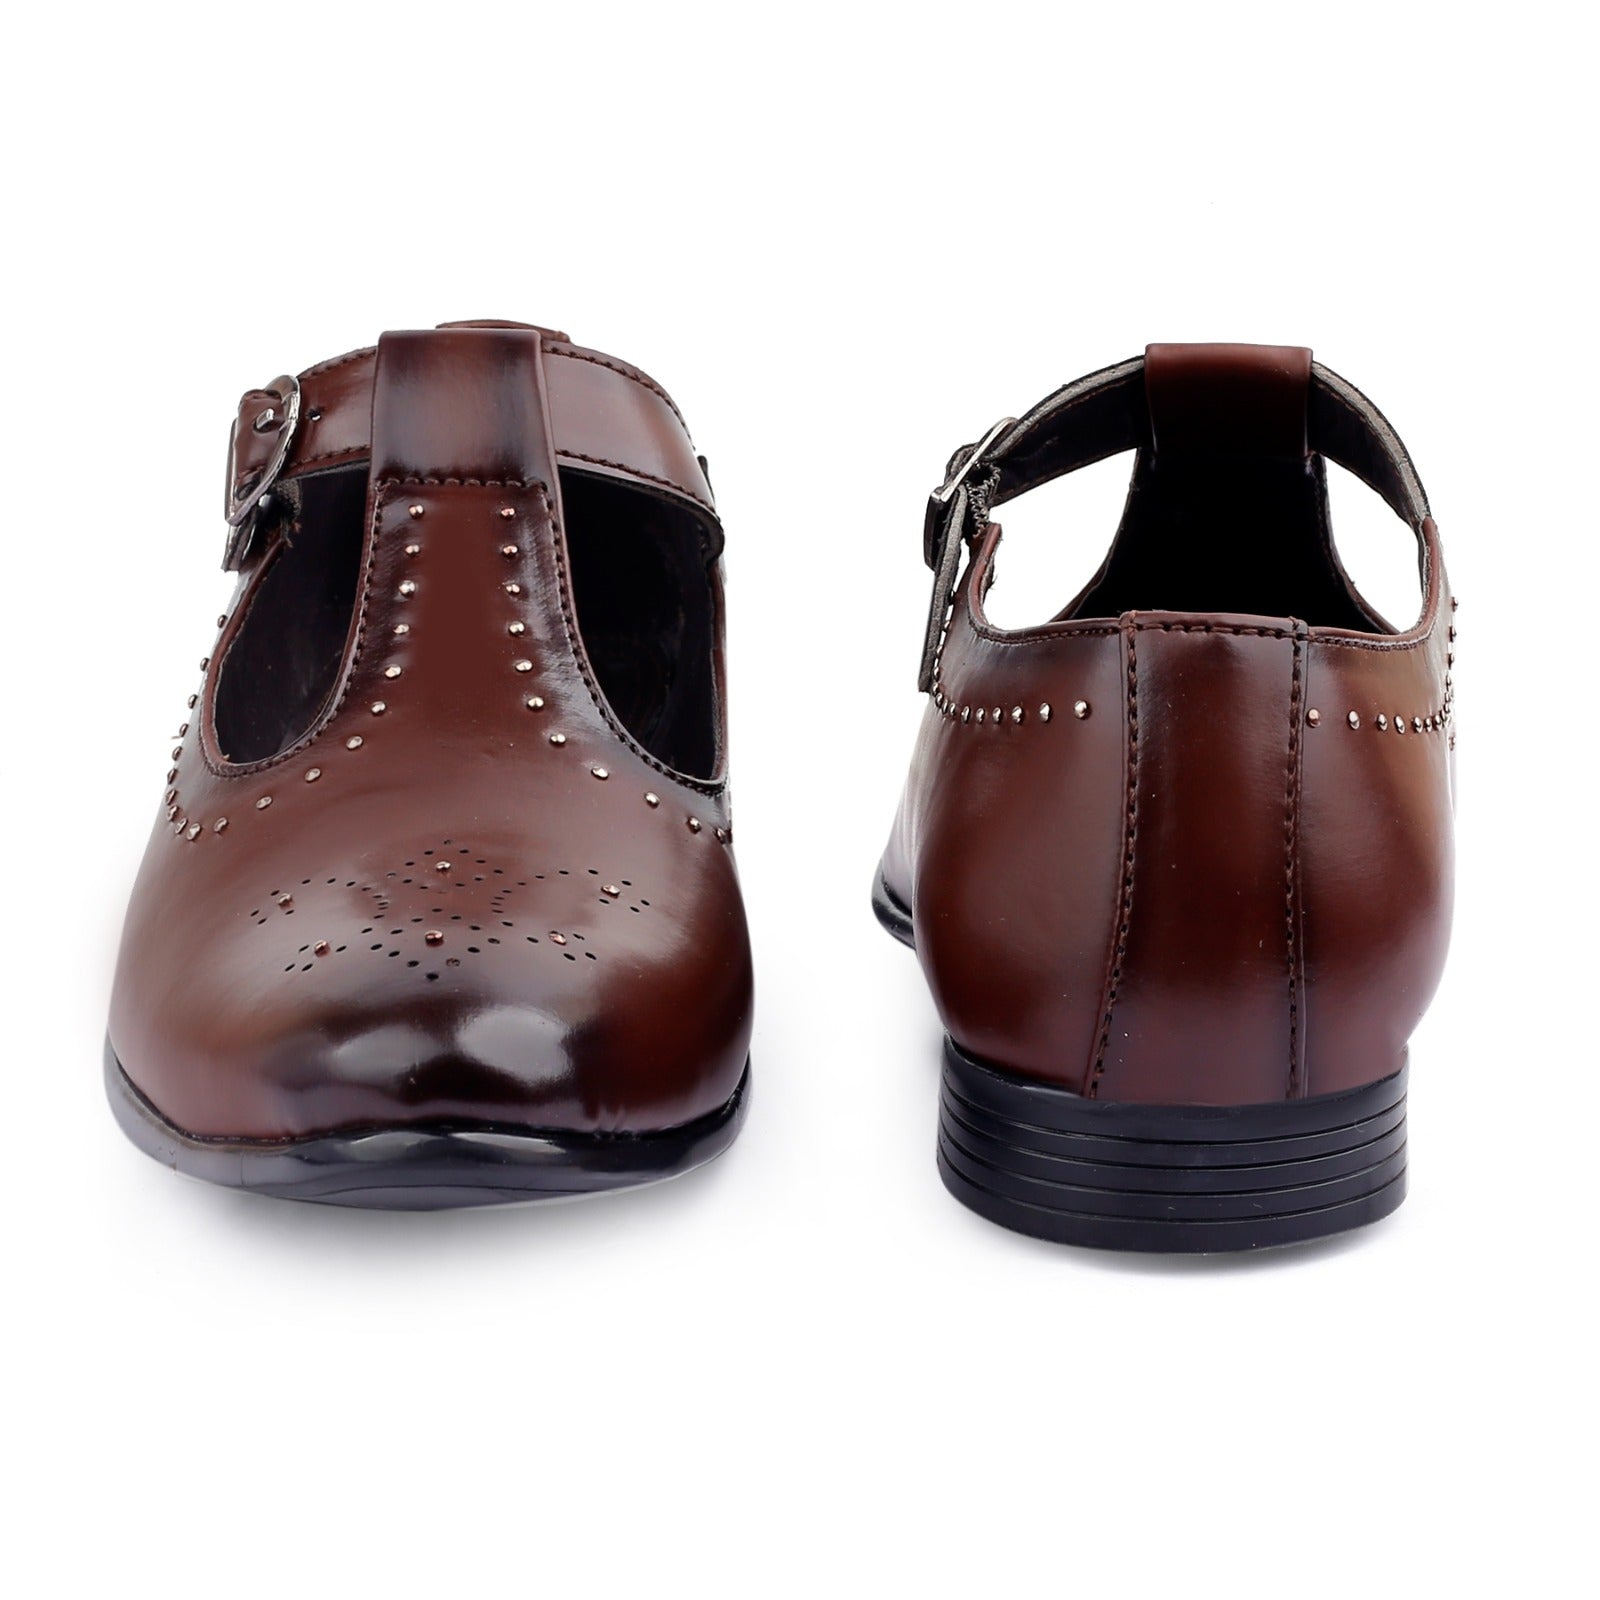 Buy Now Stylish Peshawari Shoes For Partywear And Casualwear - JackMarc - JACKMARC.COM